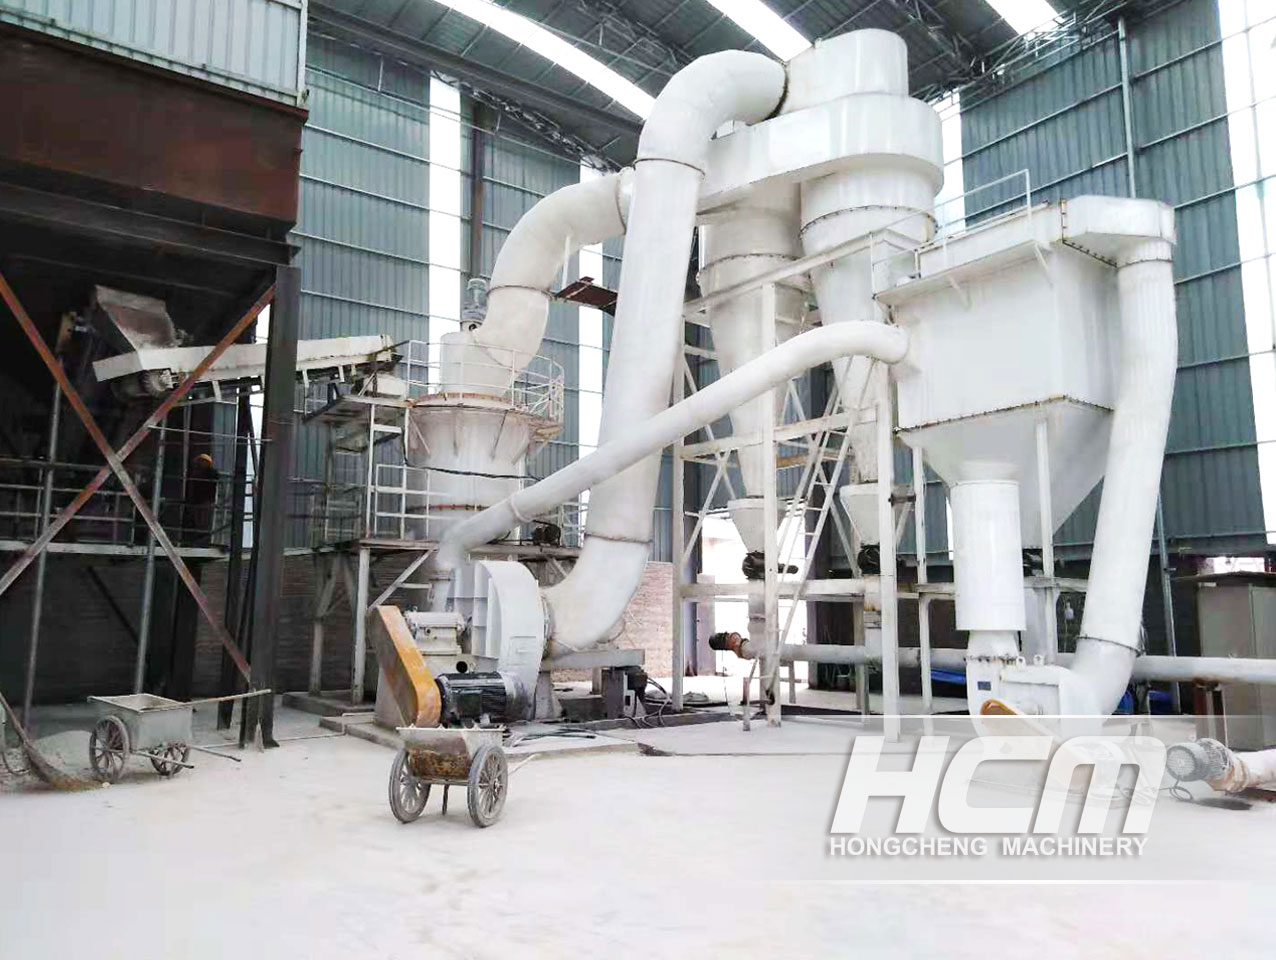 https://www.hc-mill.com/hc-super-large-grinding-mill-product/